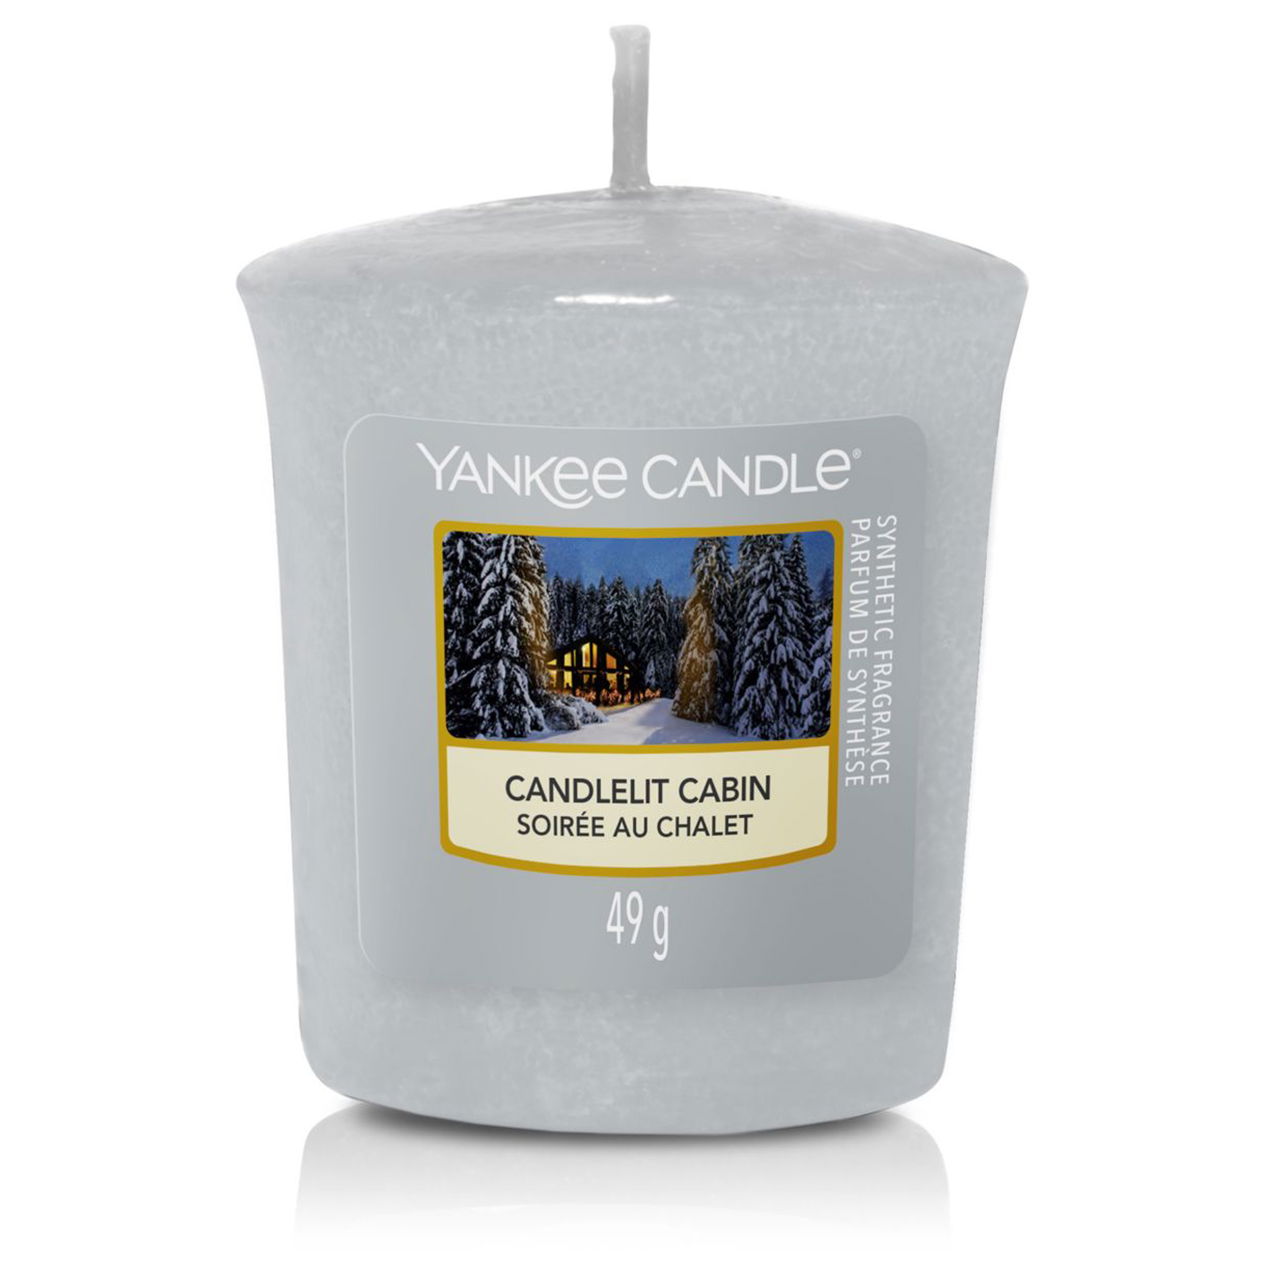 Candlelit Cabin 49g